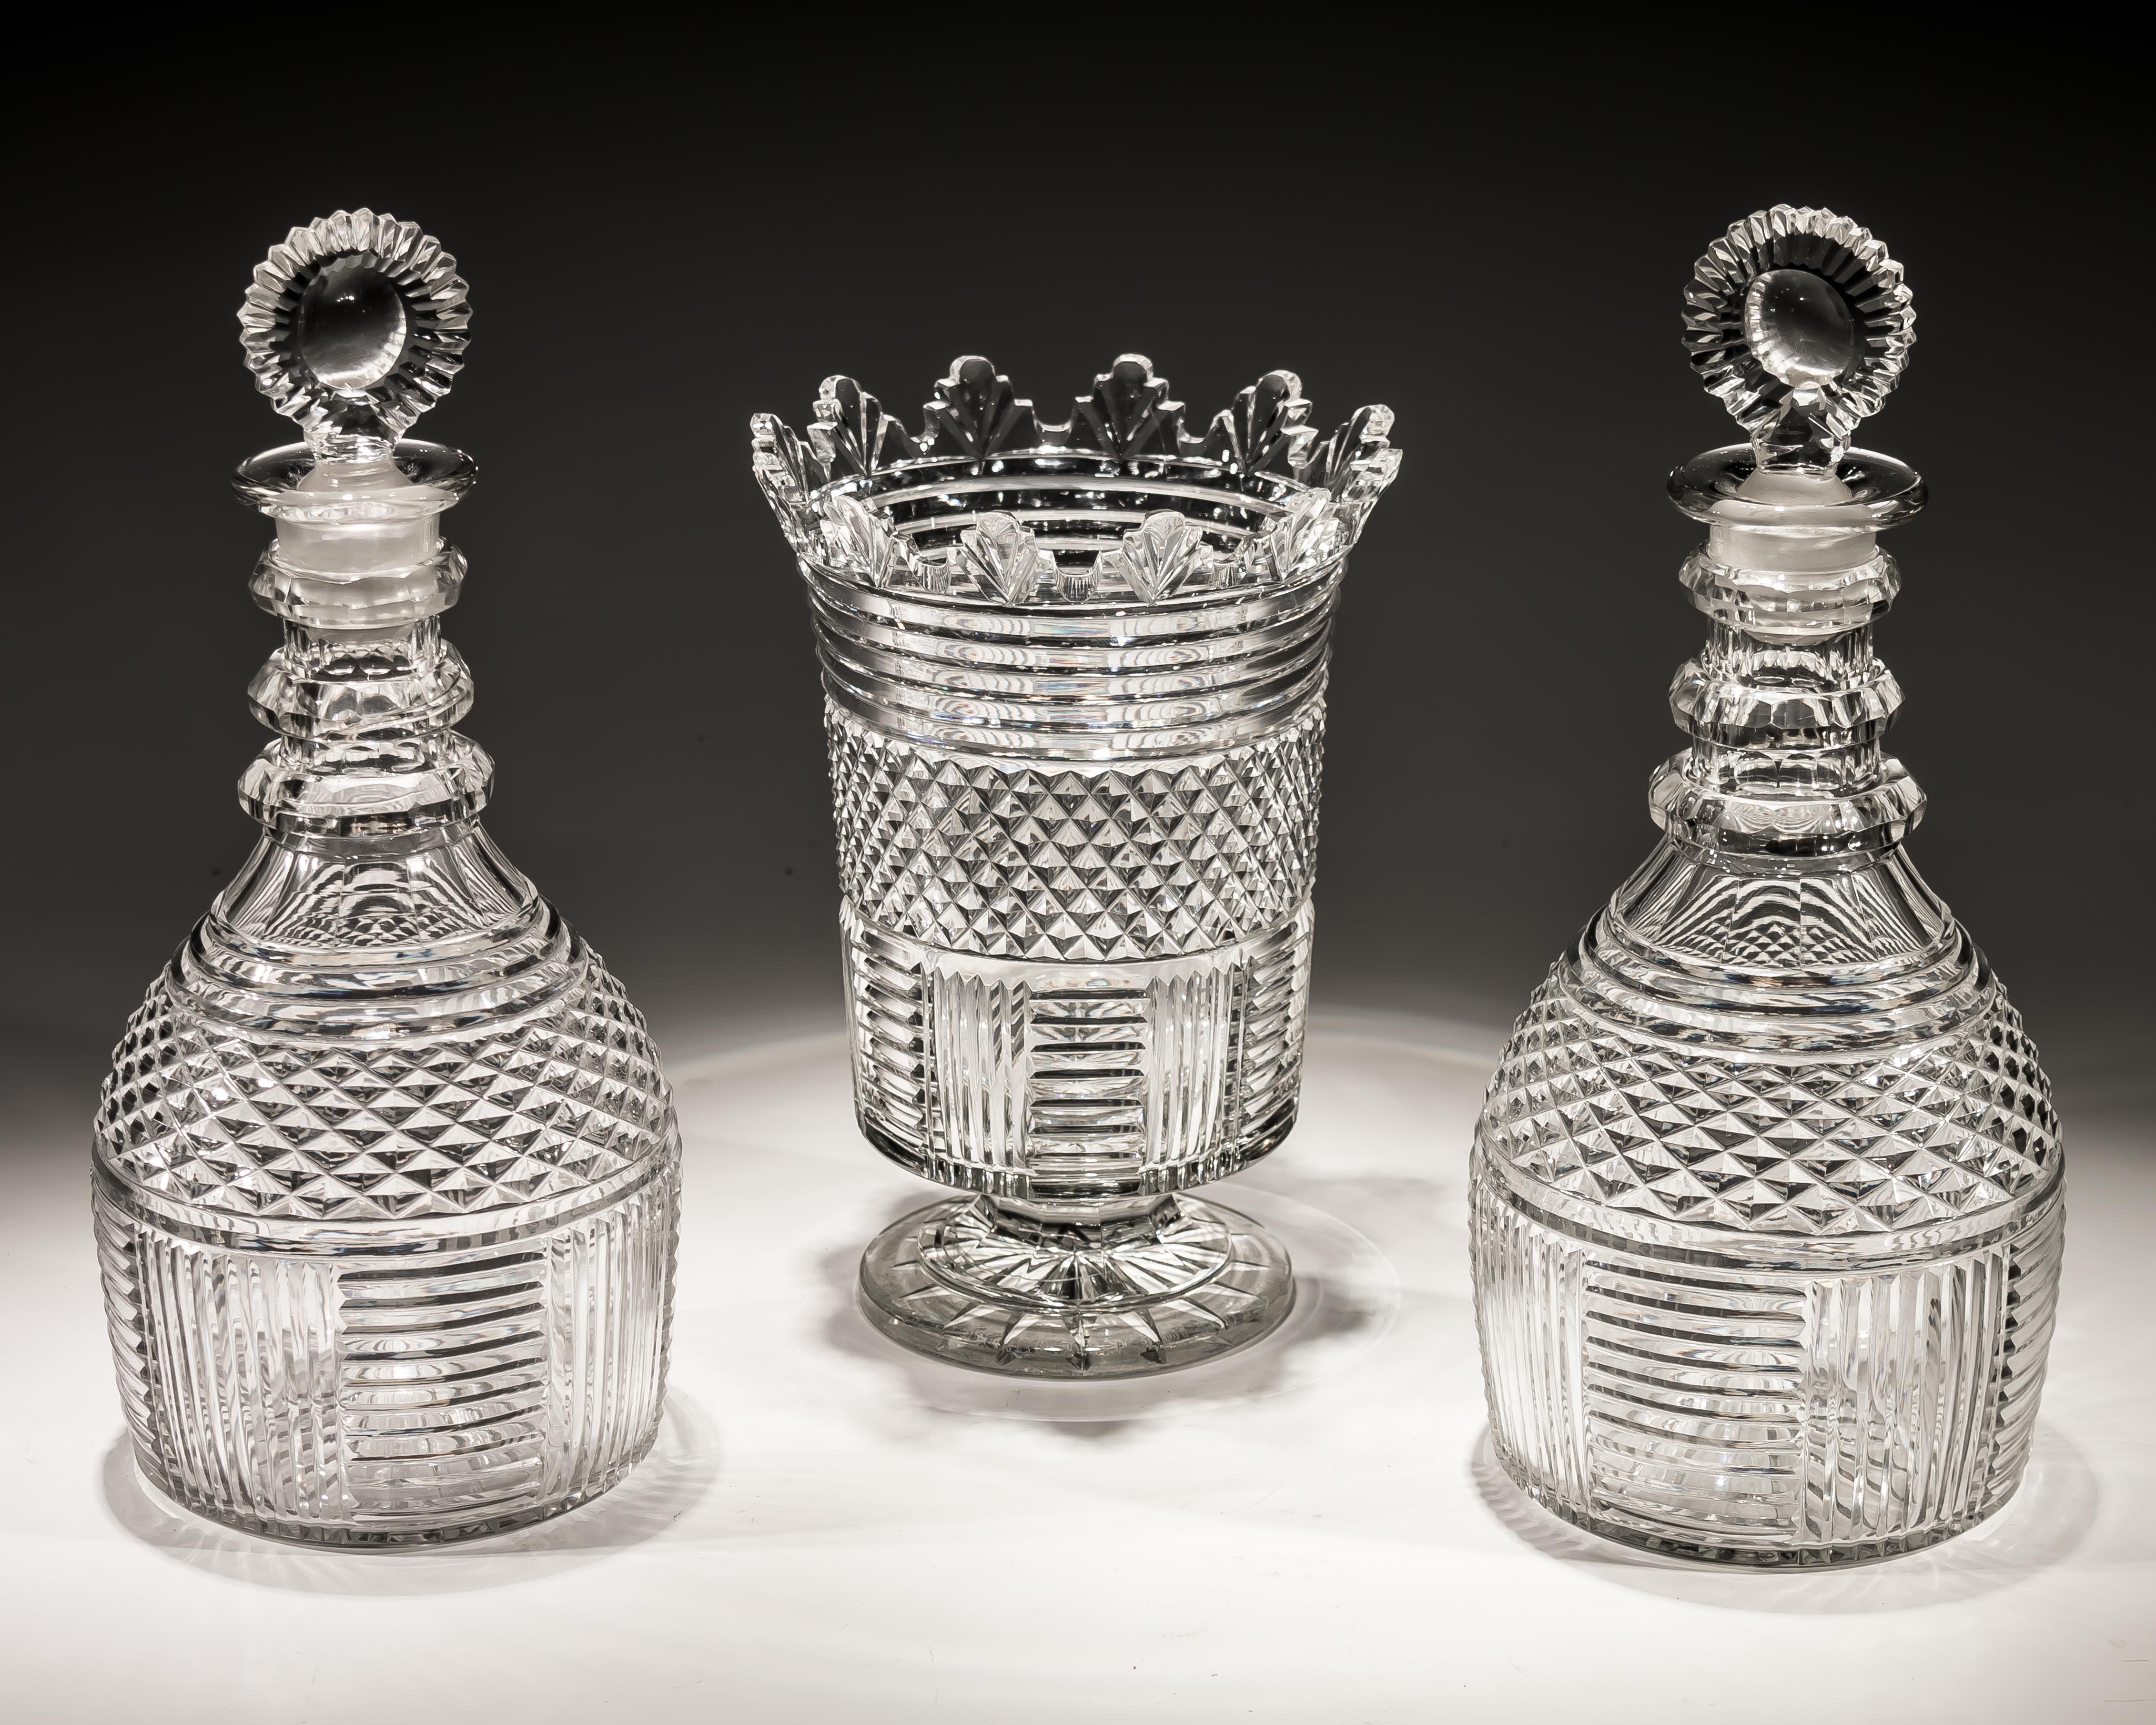 19th Century Pair of Regency Decanters with Matching Vase